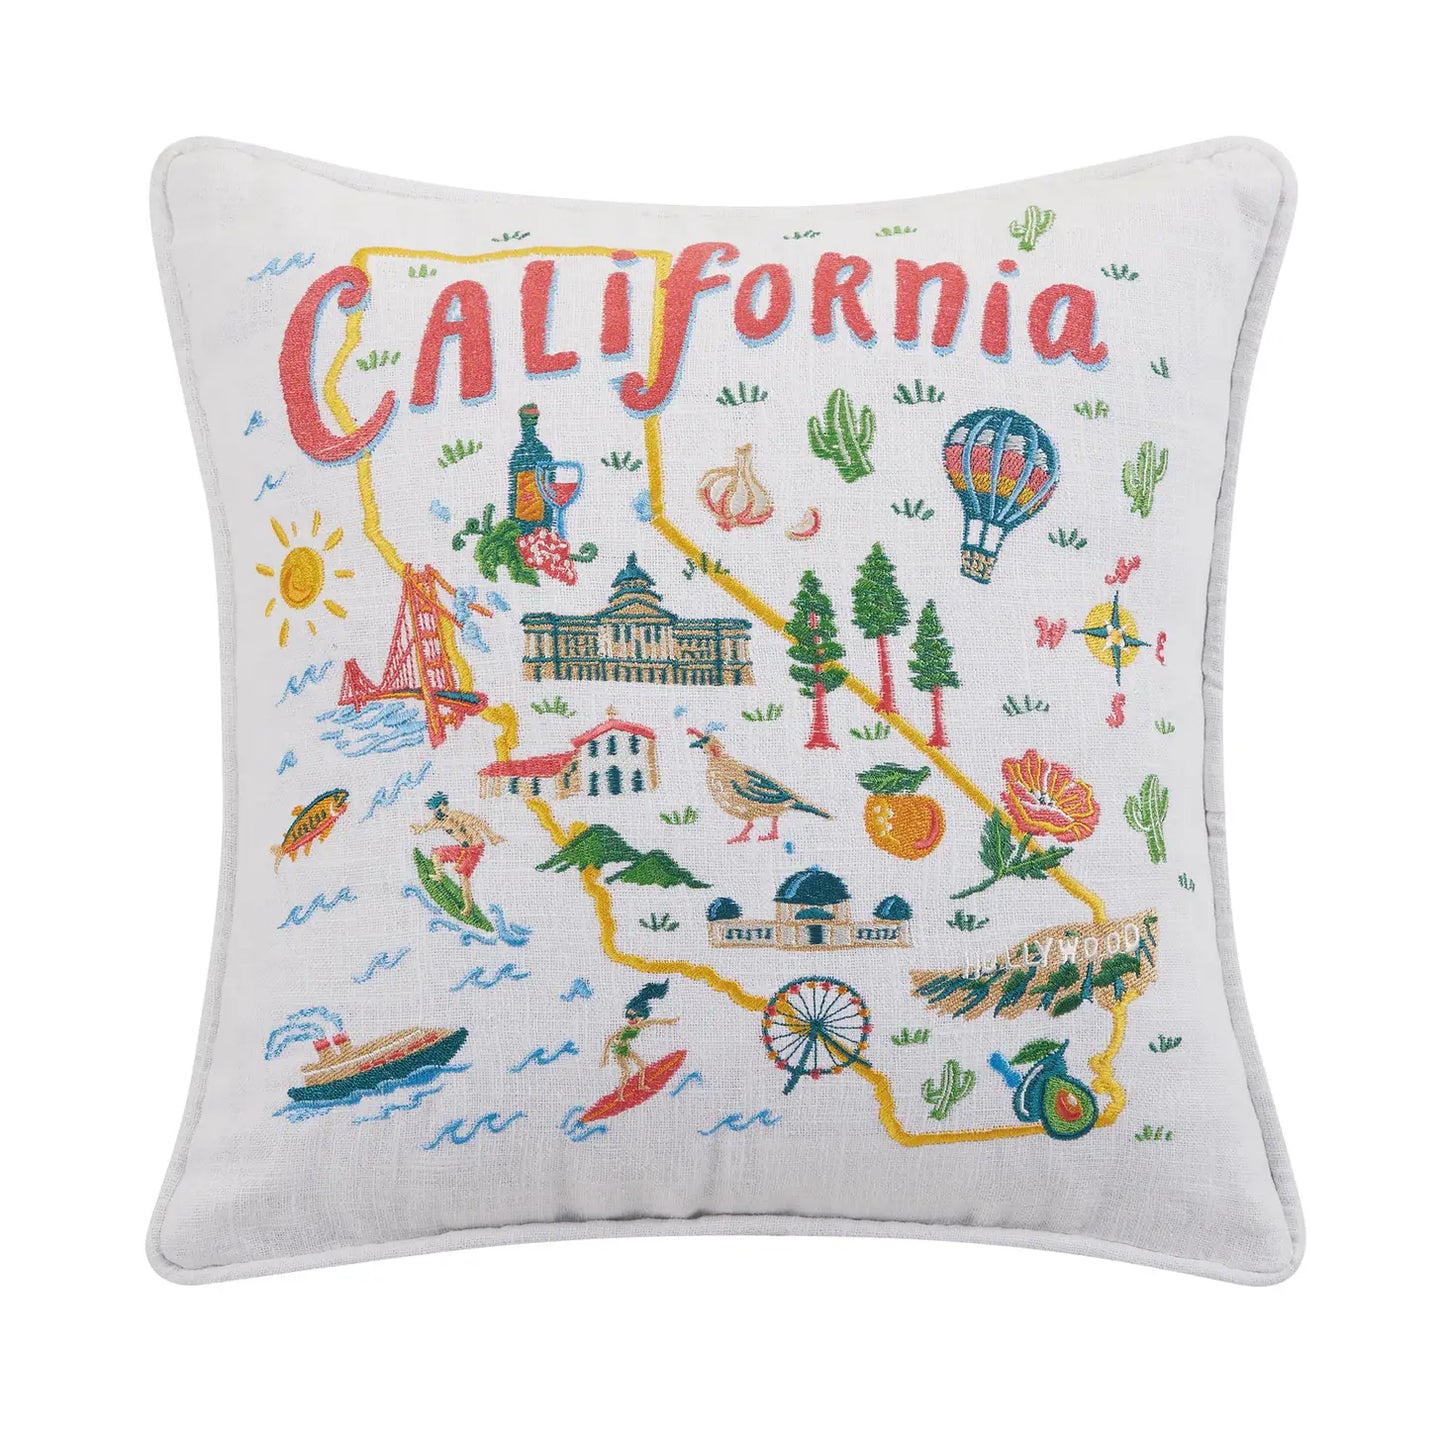 California Embroidered Pillow